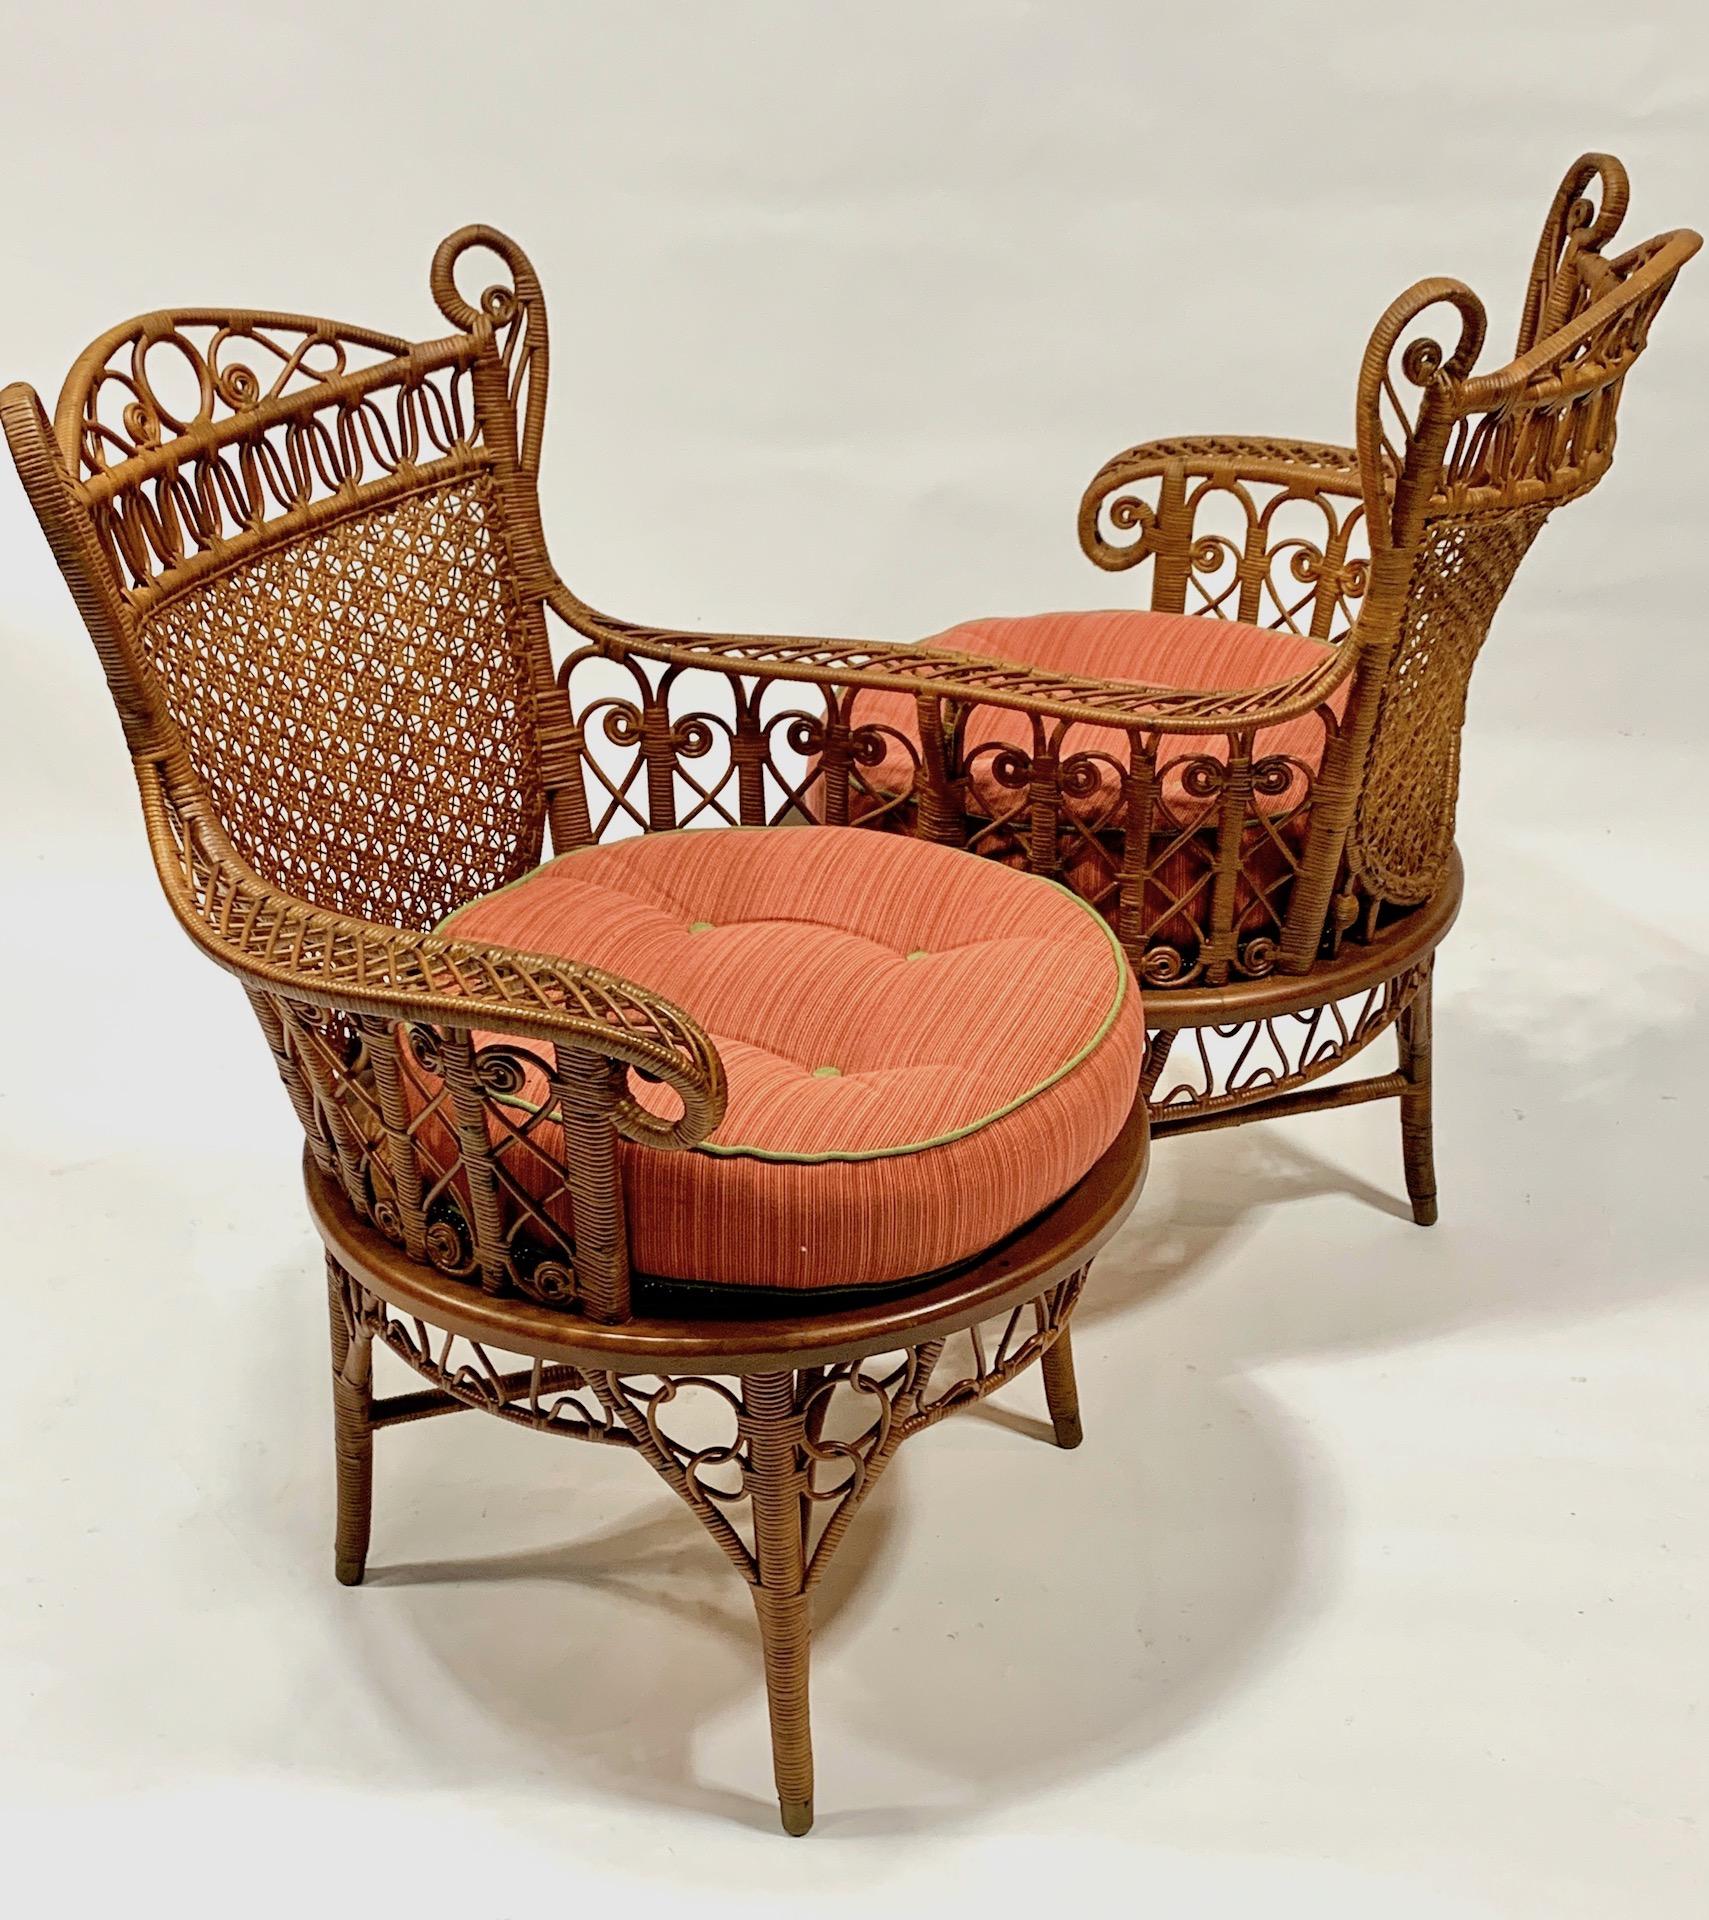 American 19th C. Wicker Conversation Chair with Intricate Caned Backs in Natural Finish